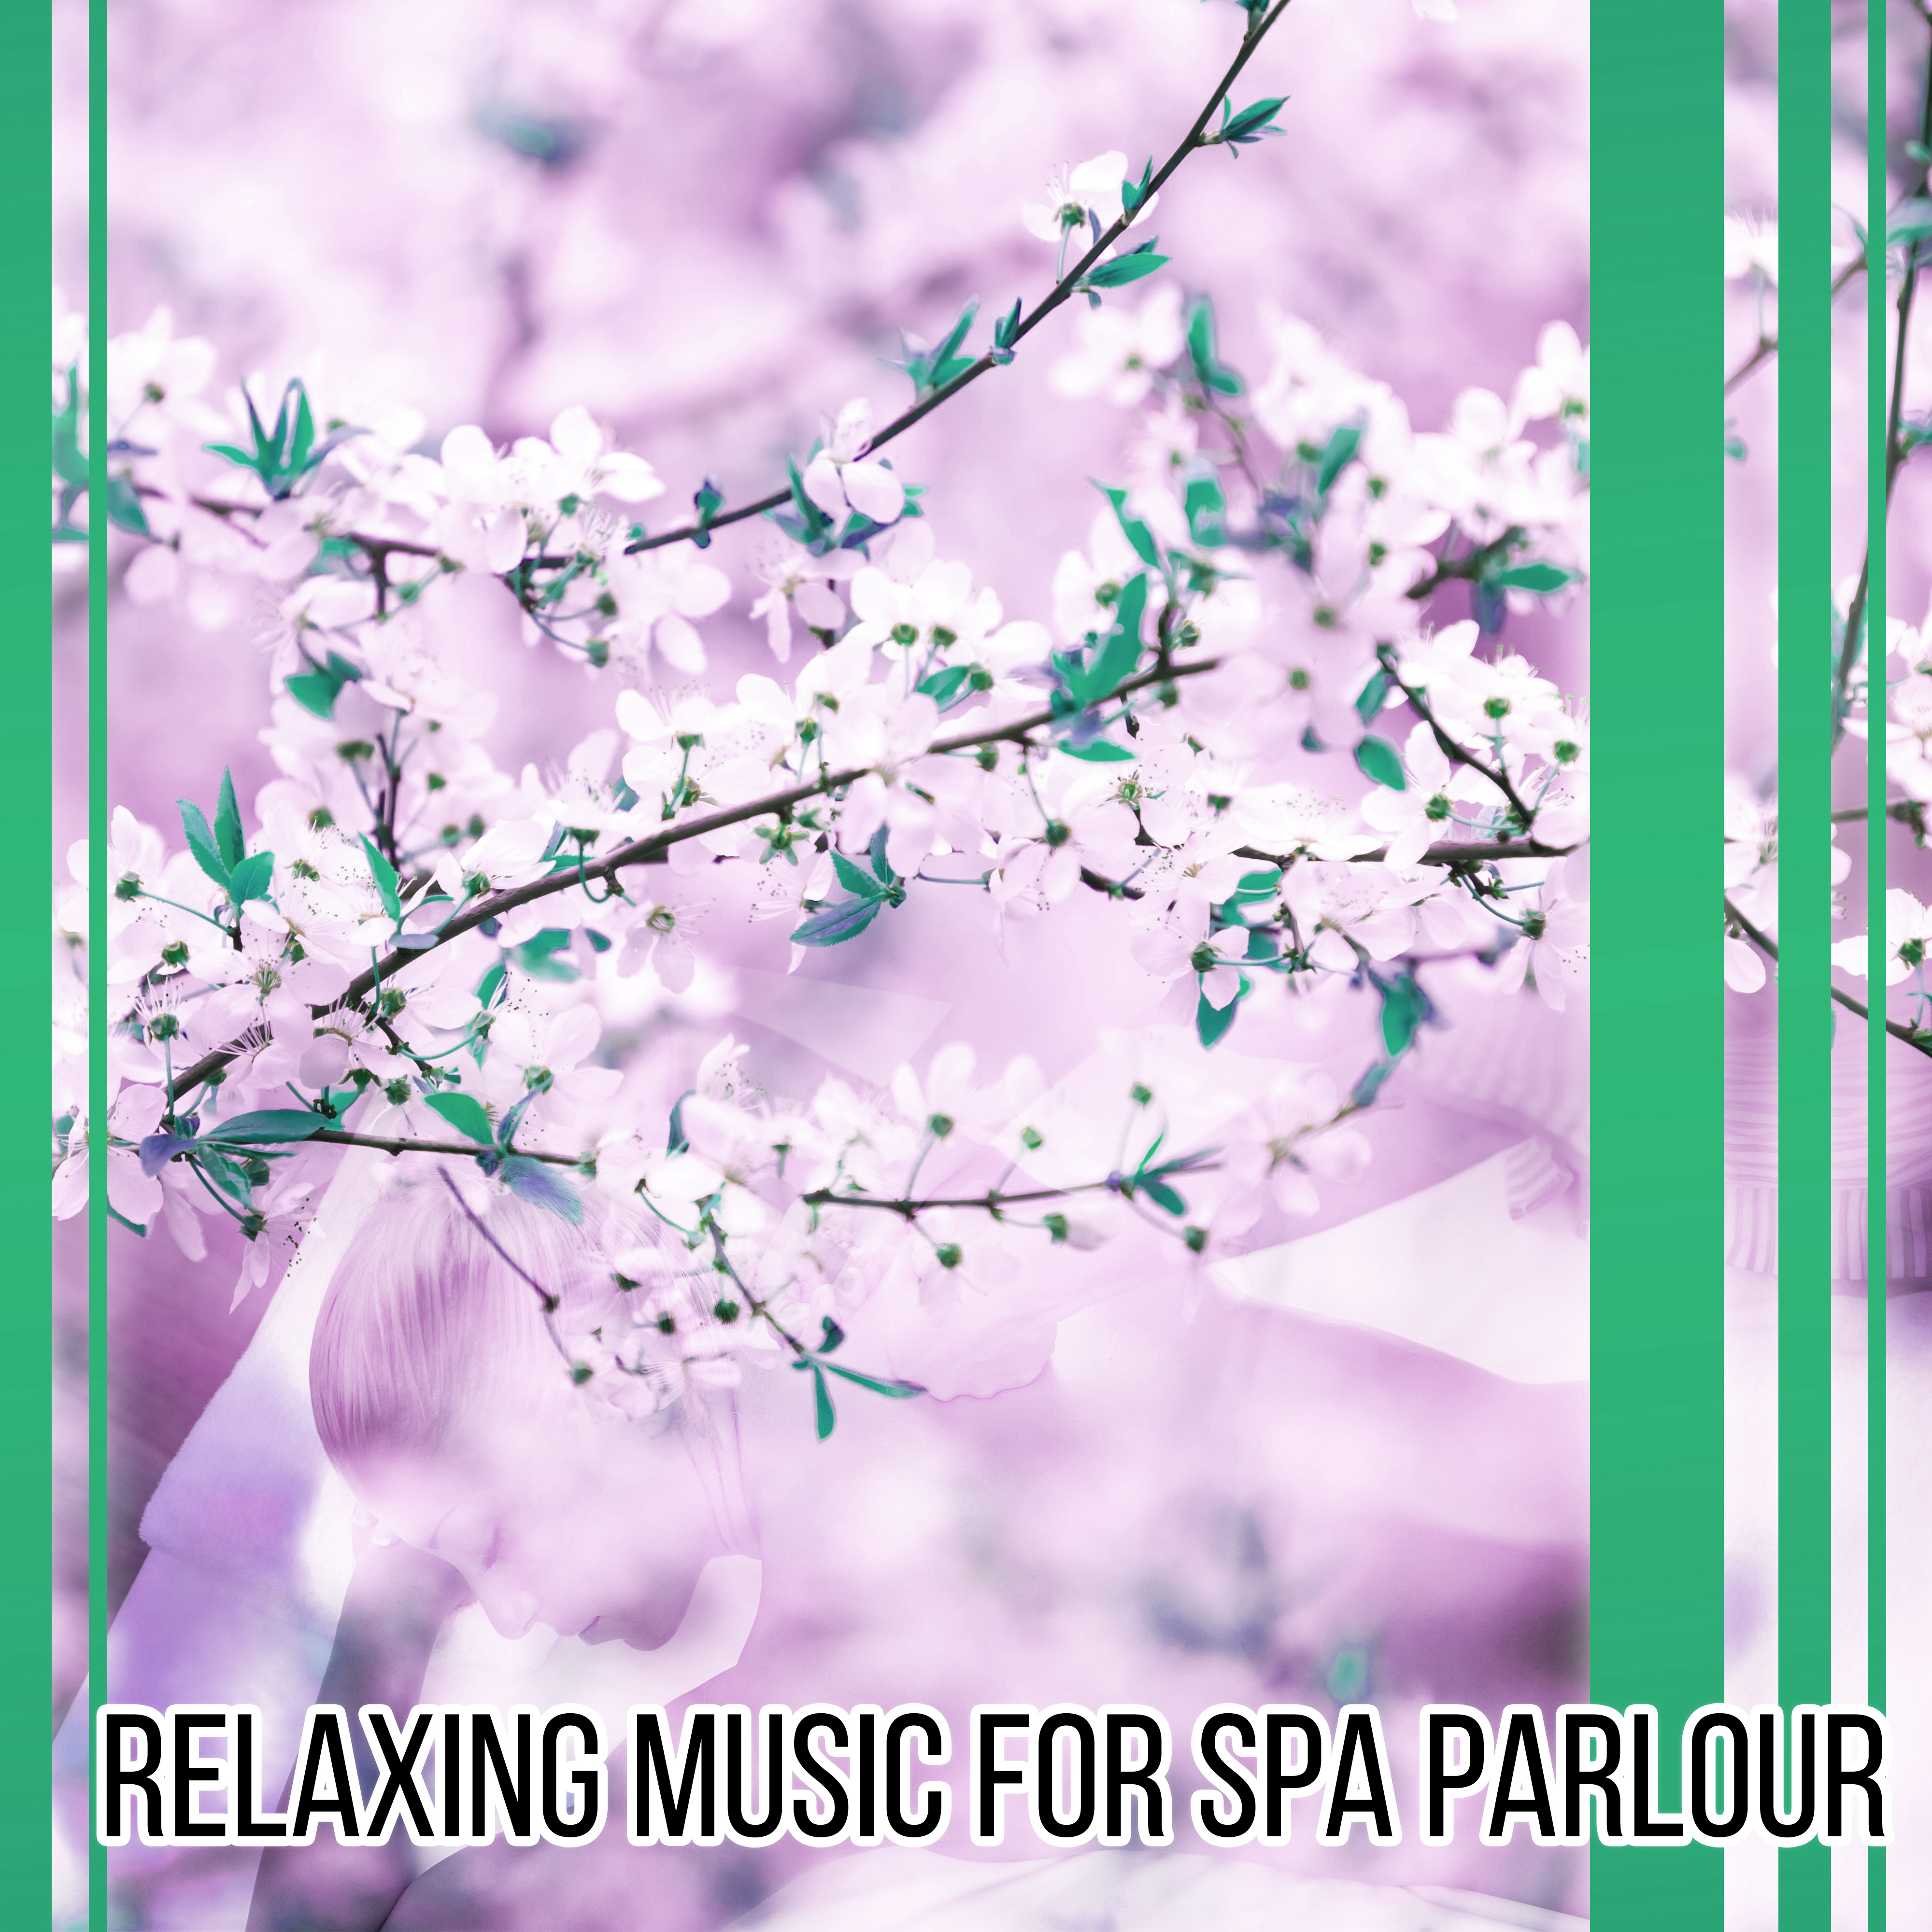 Relaxing Music for Spa Parlour – Nature Sounds for Massage Background, Relaxing Music Helpful Calm Down & Relax